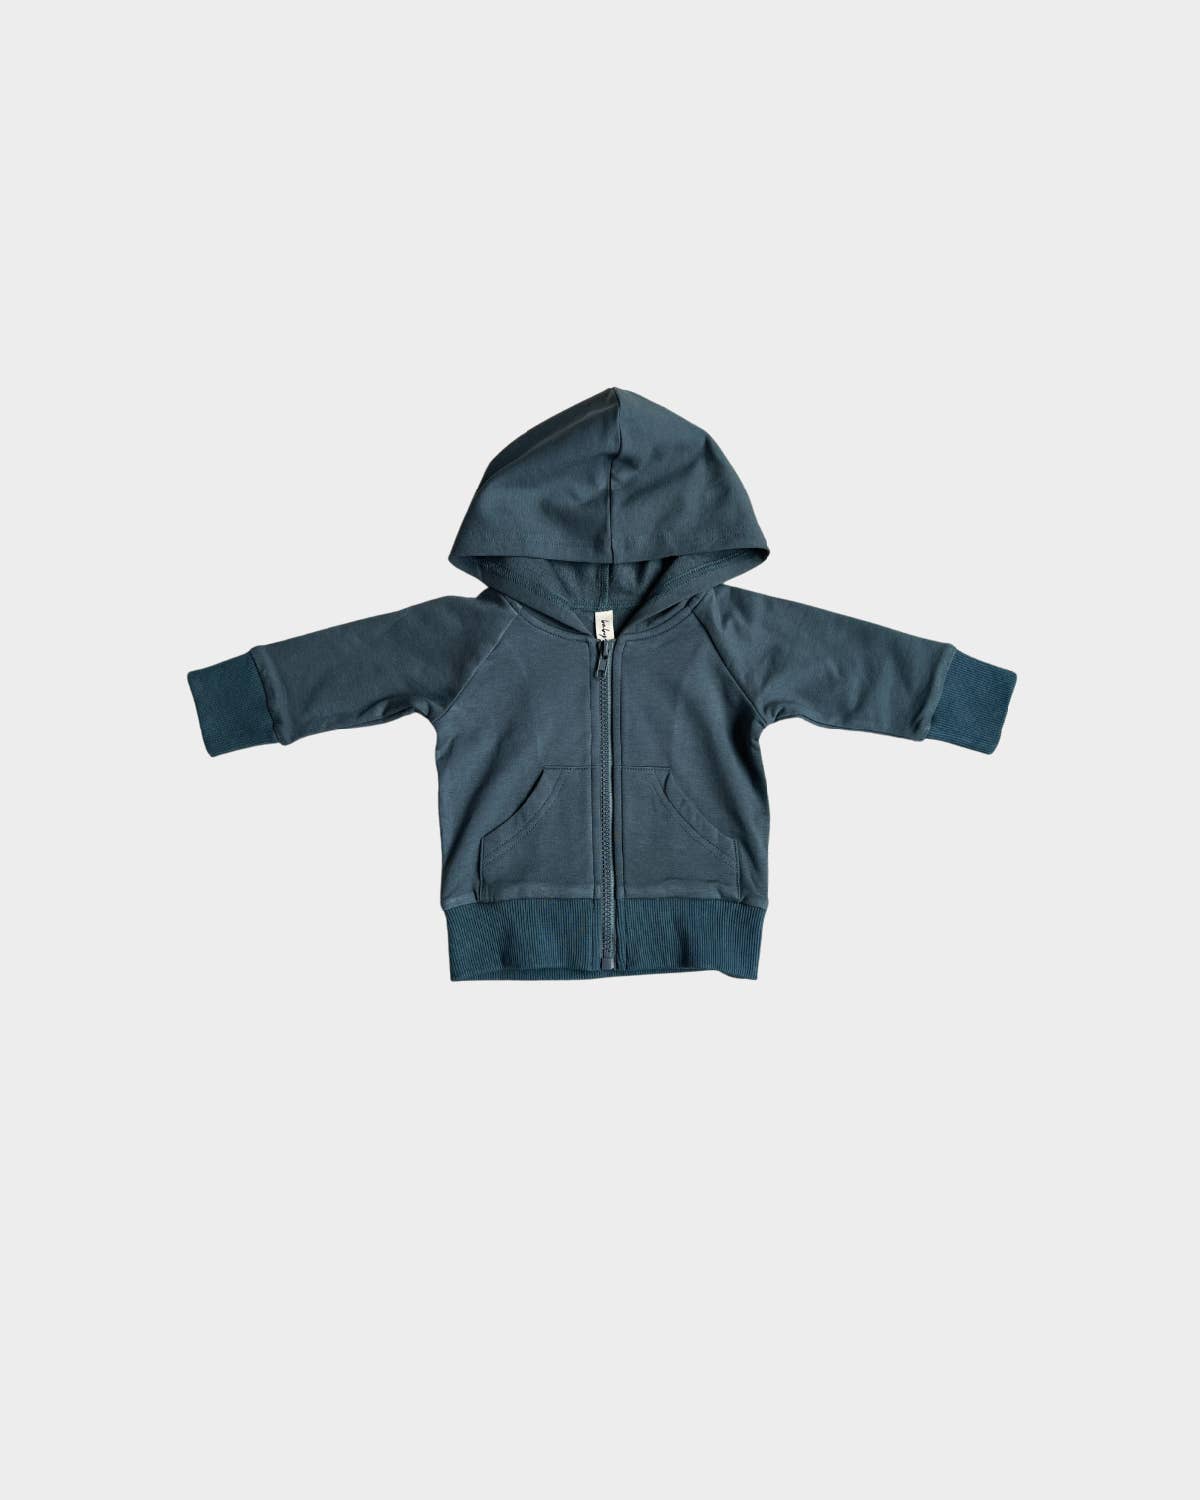 babysprouts clothing company - F23 D2: Kids Hooded Jacket in Dark Slate